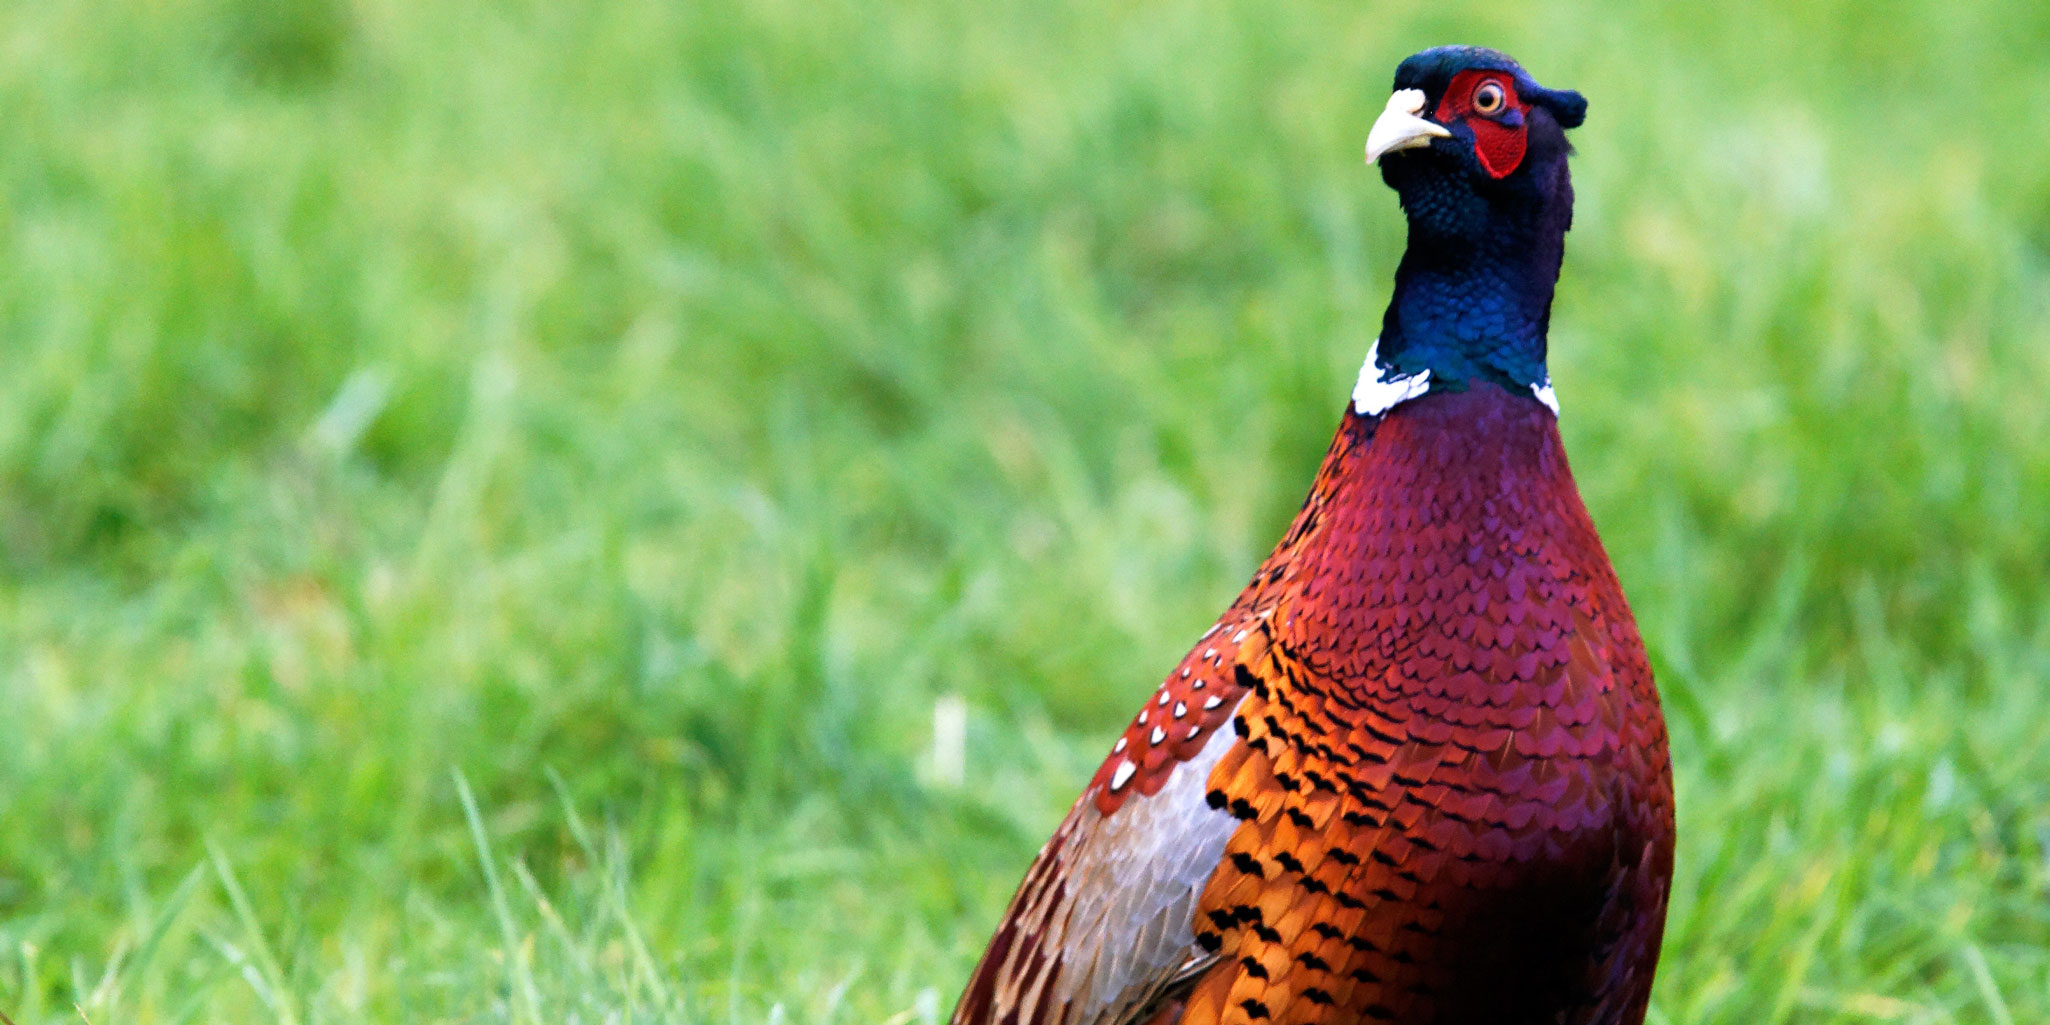 THE GREAT OUTDOORS: Ring-necked pheasant: A glorious game bird of old, Lifestyles